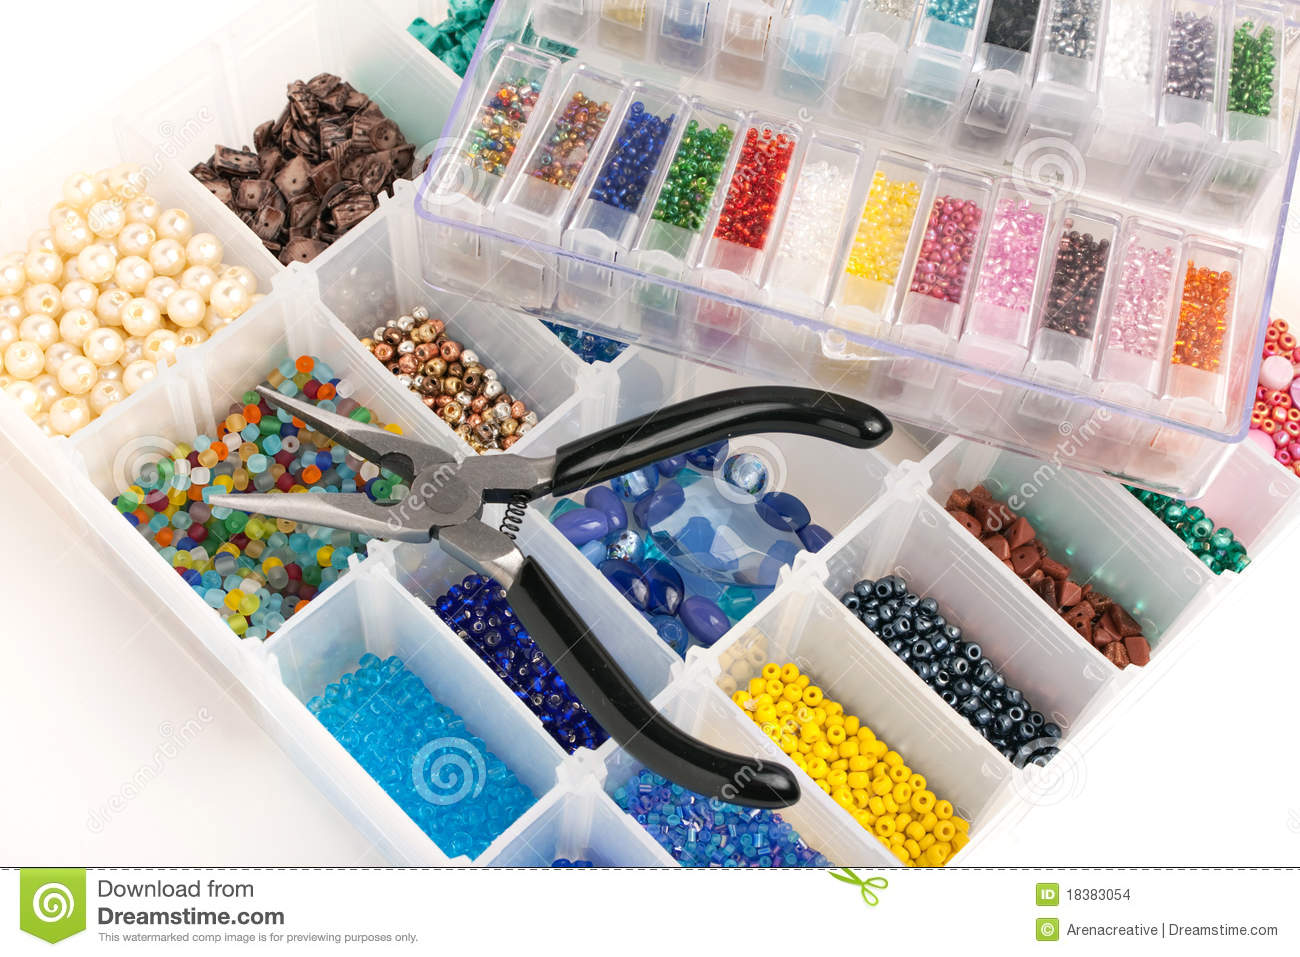     Full Of Multi Colored Beads And Tools For Making Jewelry And Crafts